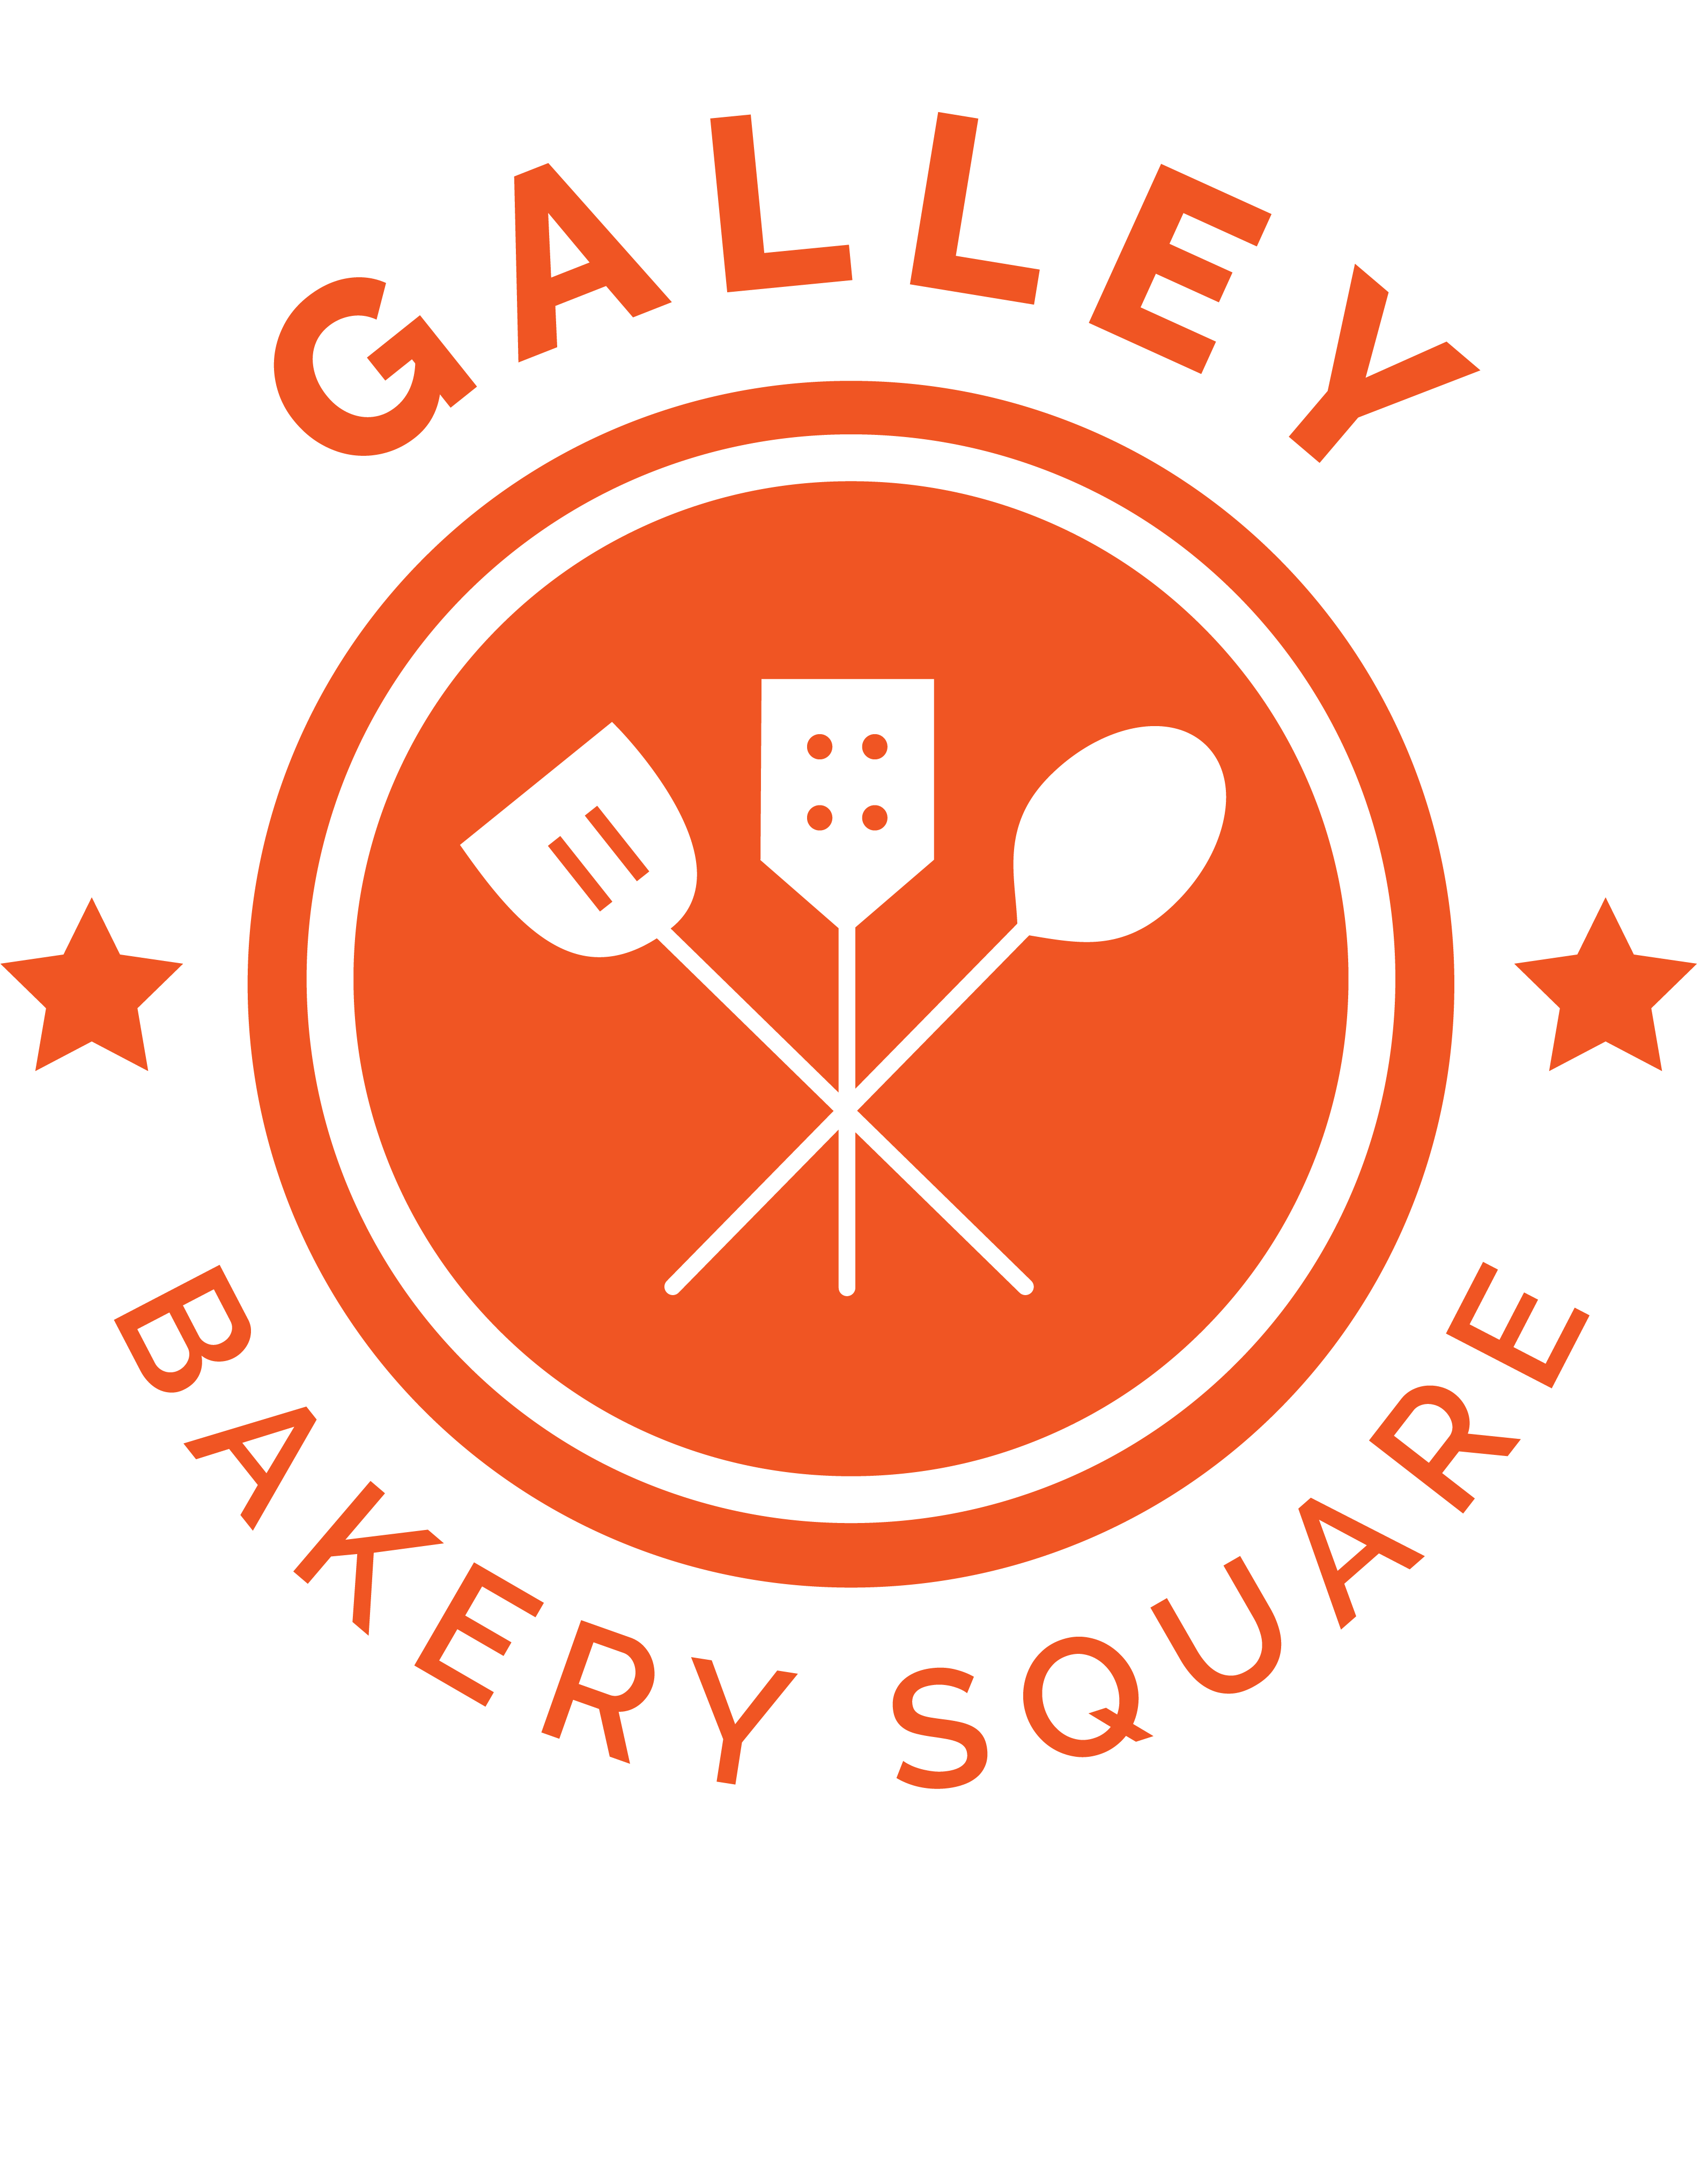 Galley Bakery Square Logo